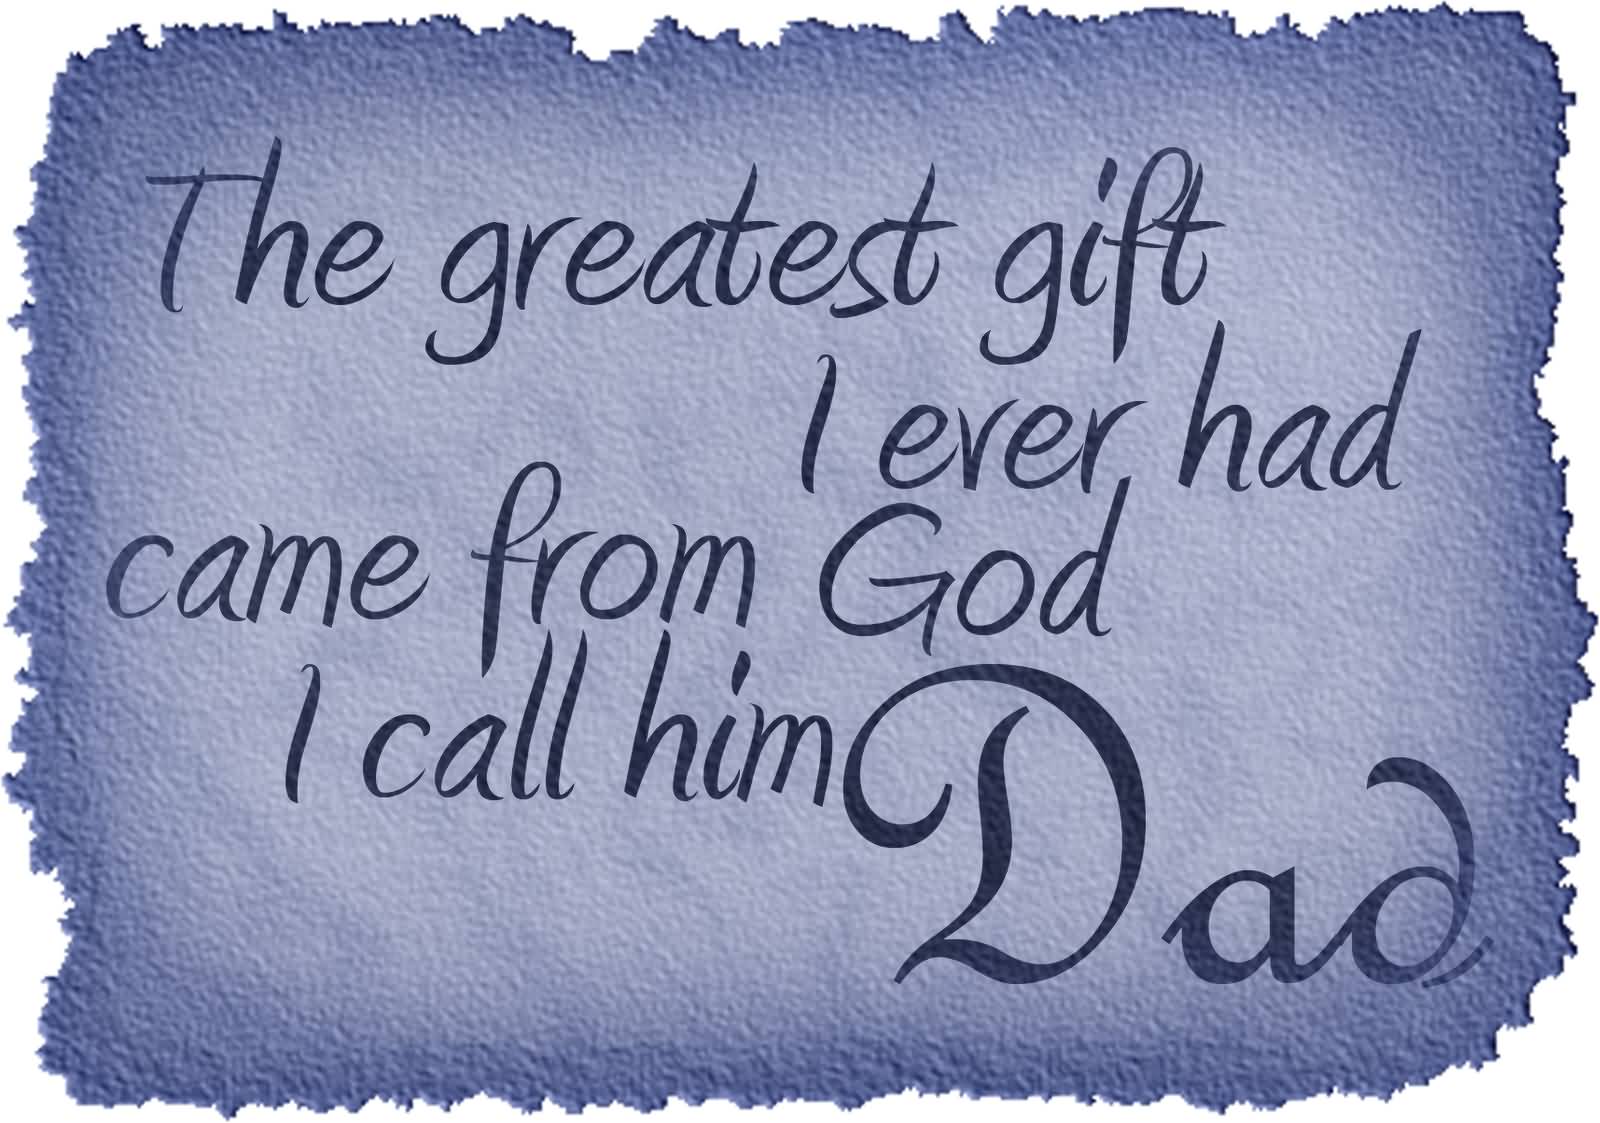 The Greatest Gift I Ever Had Came From God I Call Him Dad - Happy Fathers Day Wishes